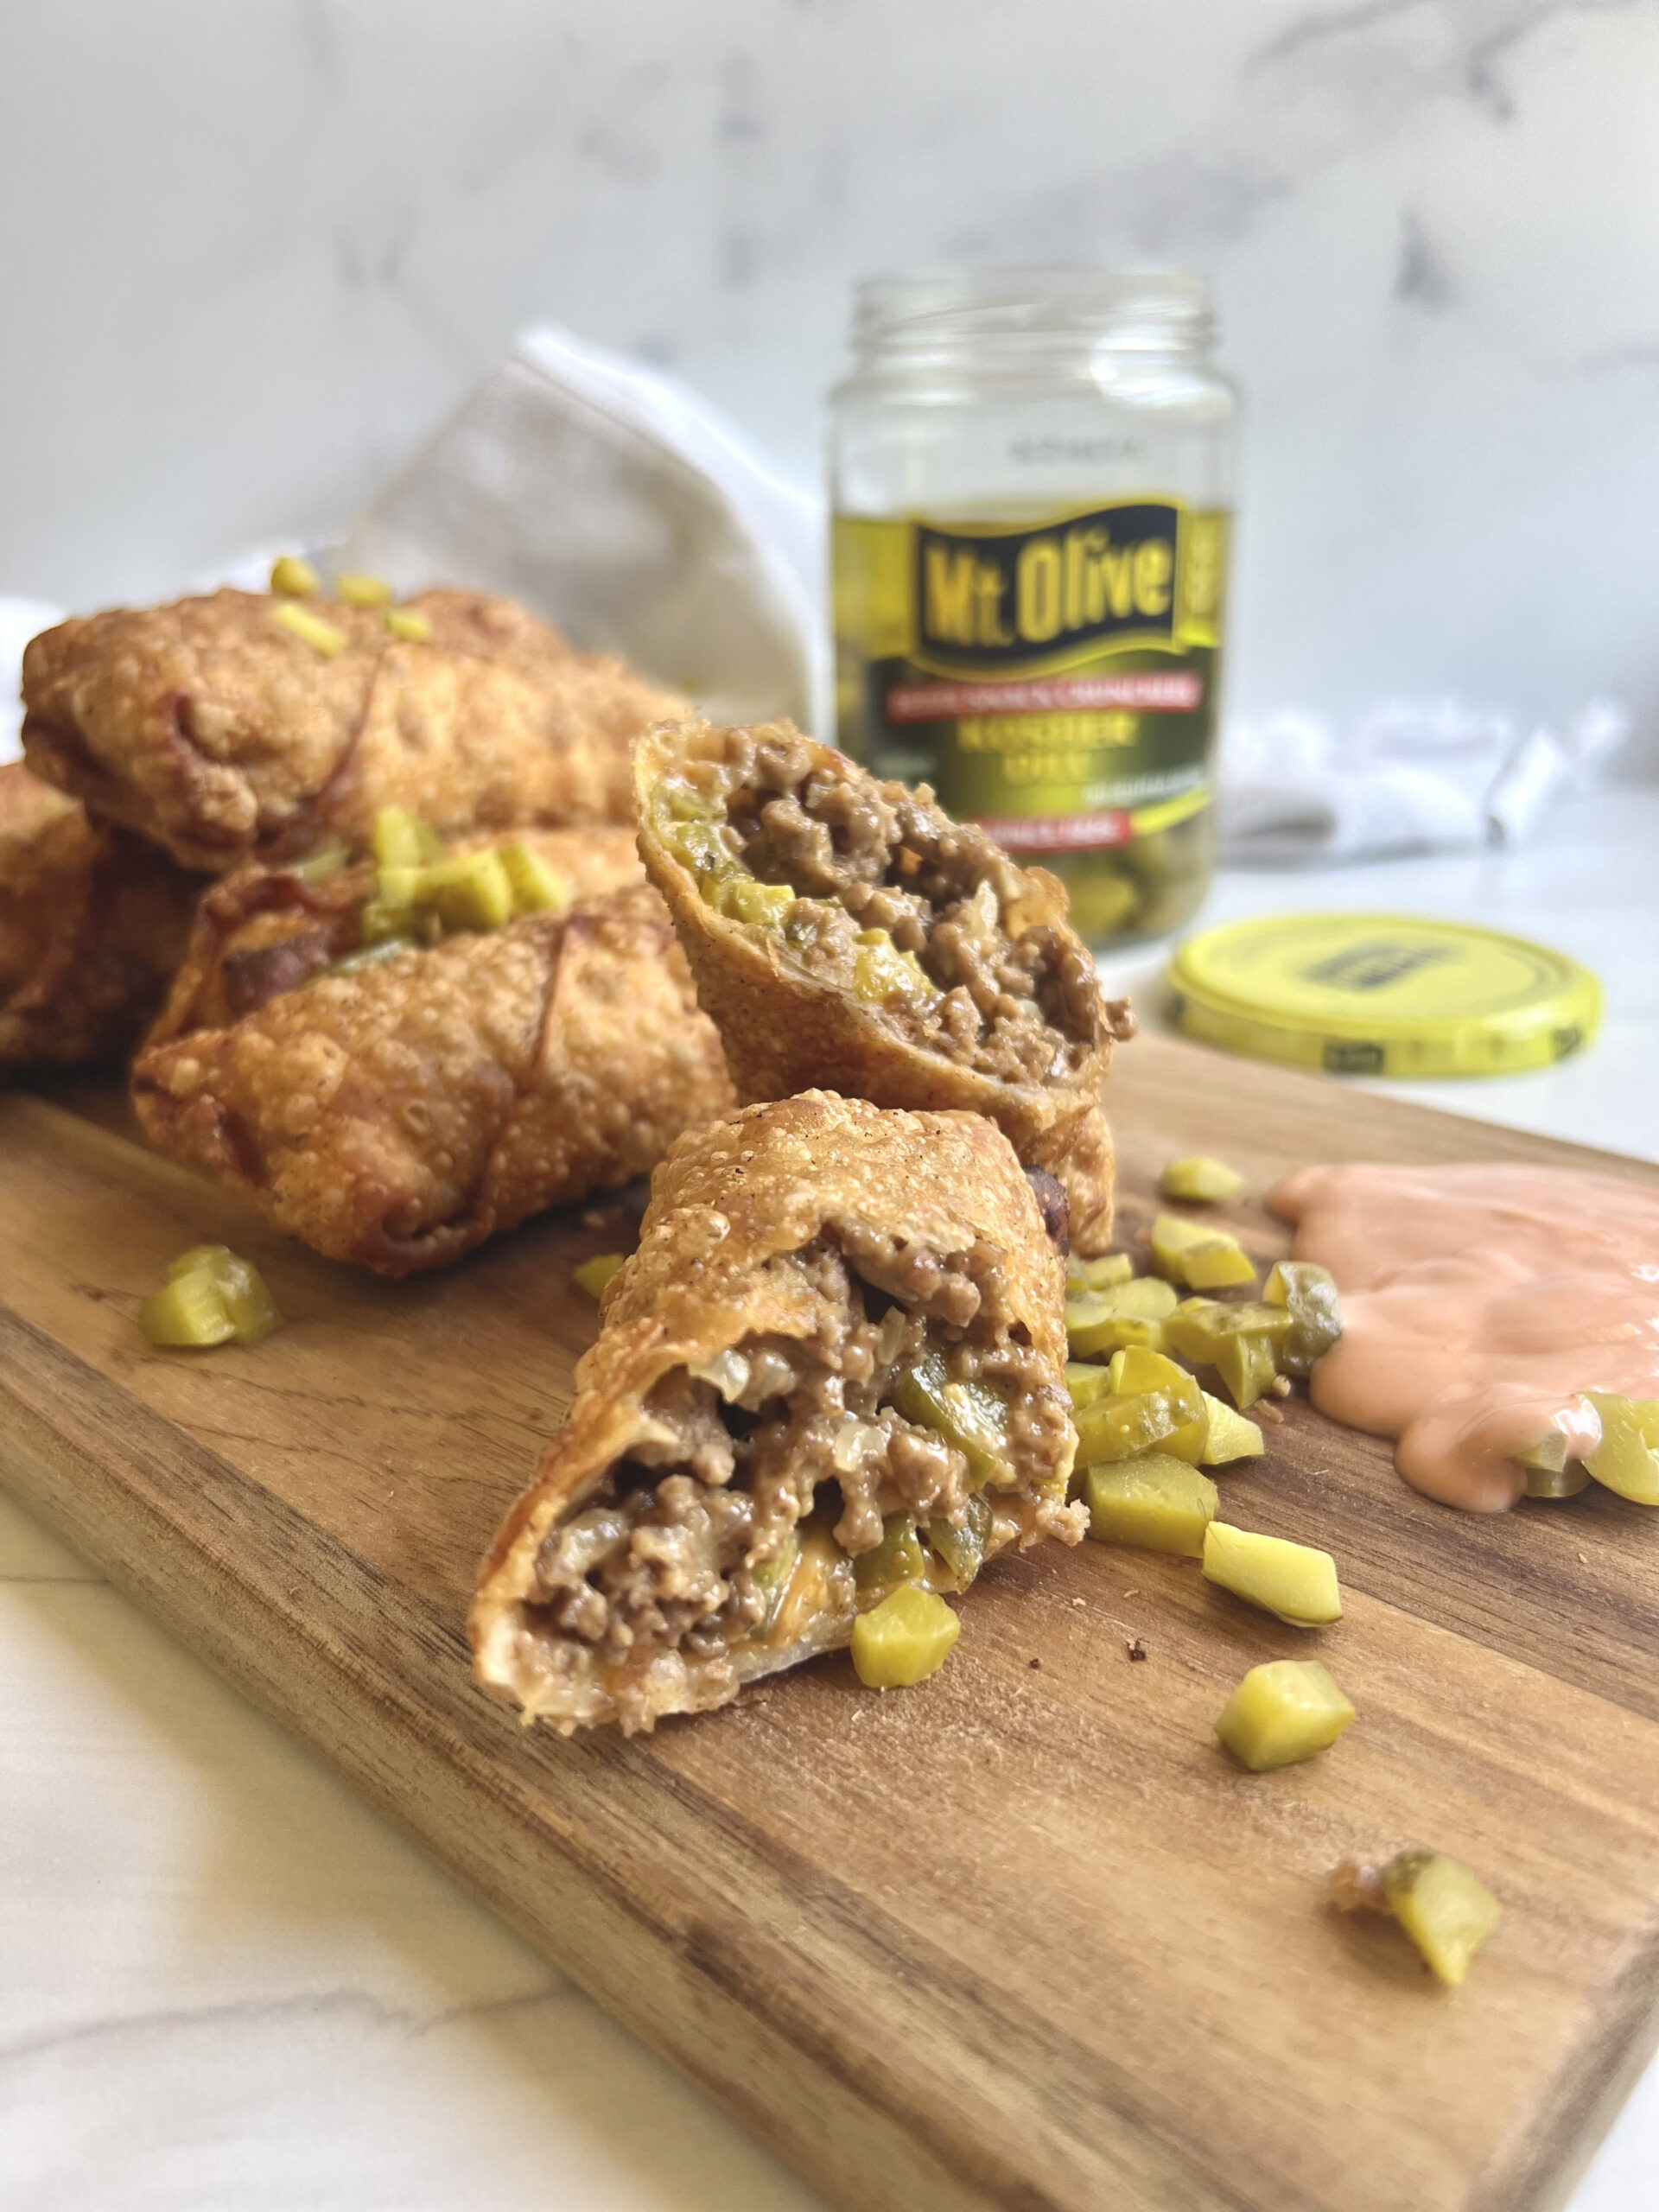 Cheeseburger Egg Rolls on a wooden cutting board with pickles and a jar of pickles in back